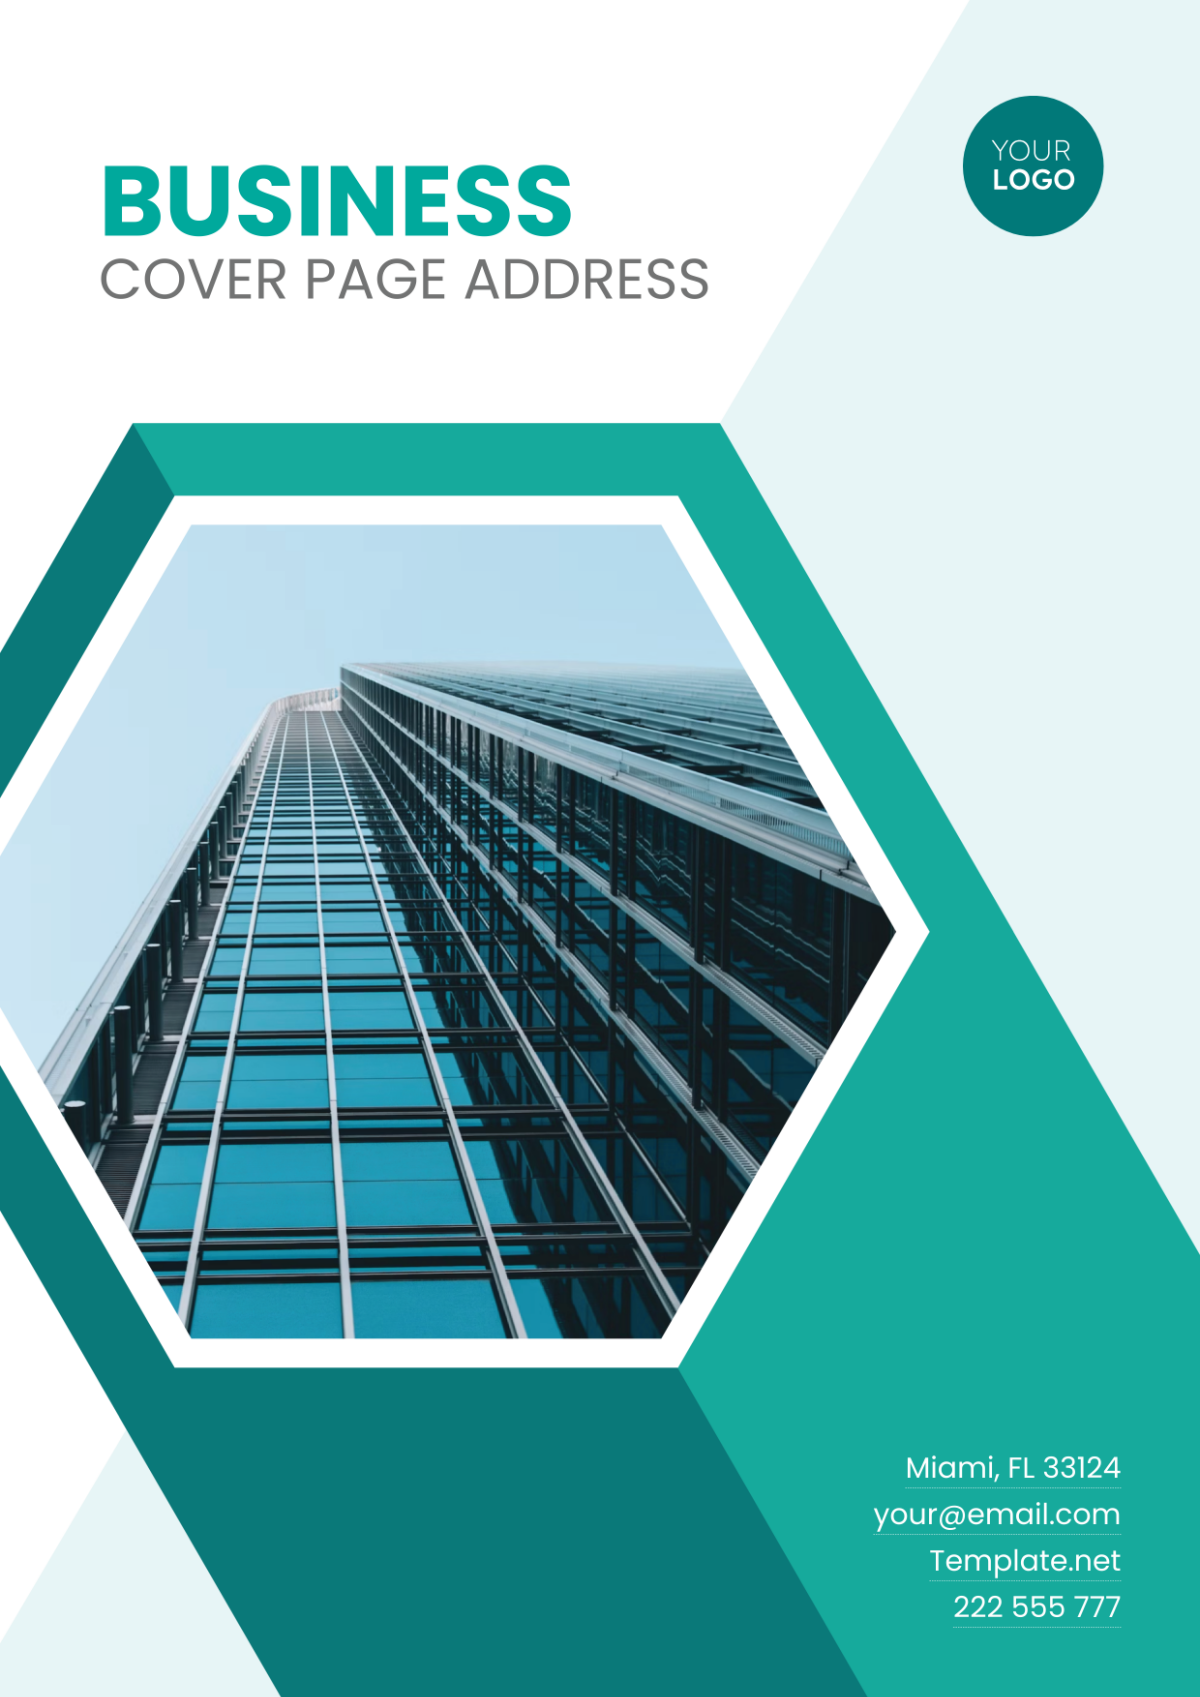 Business Cover Page Address Template